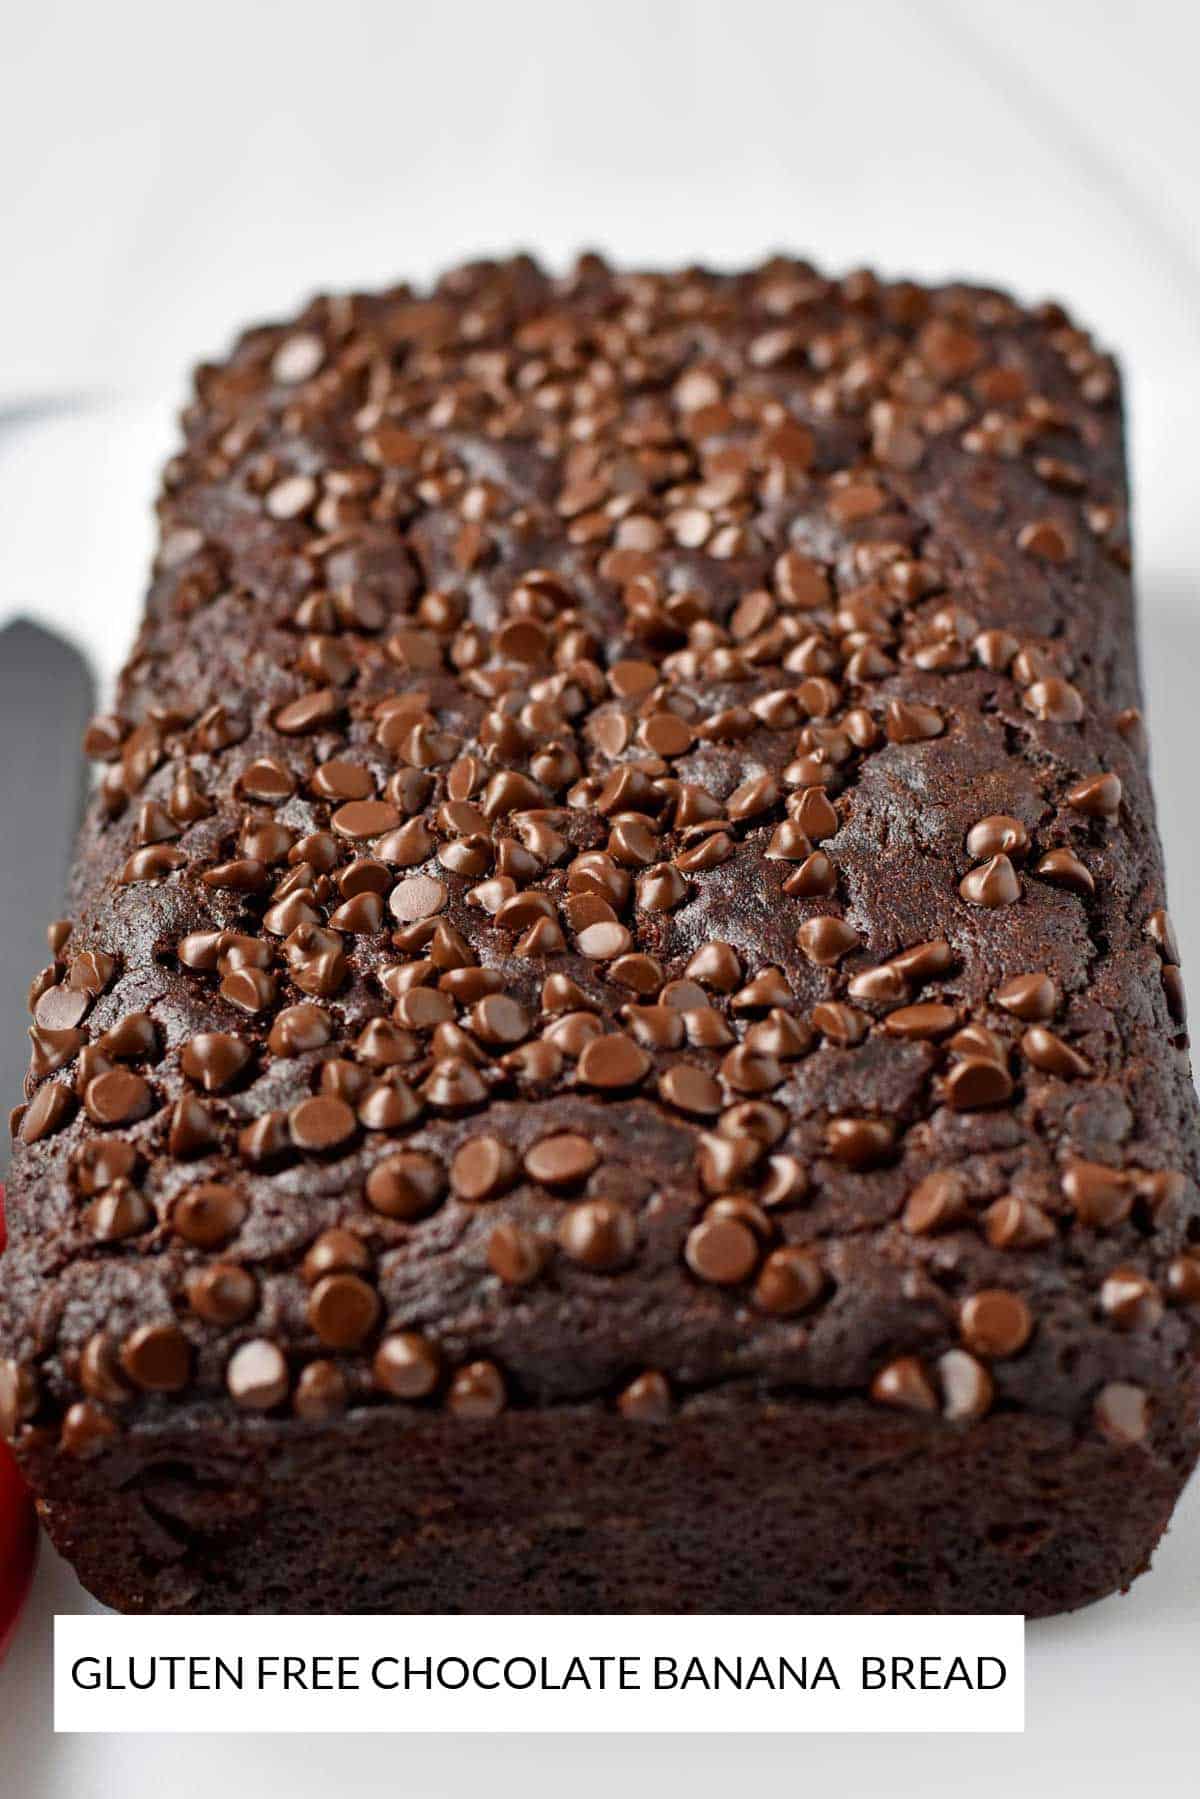 A loaf of gluten free chocolate banana bread.